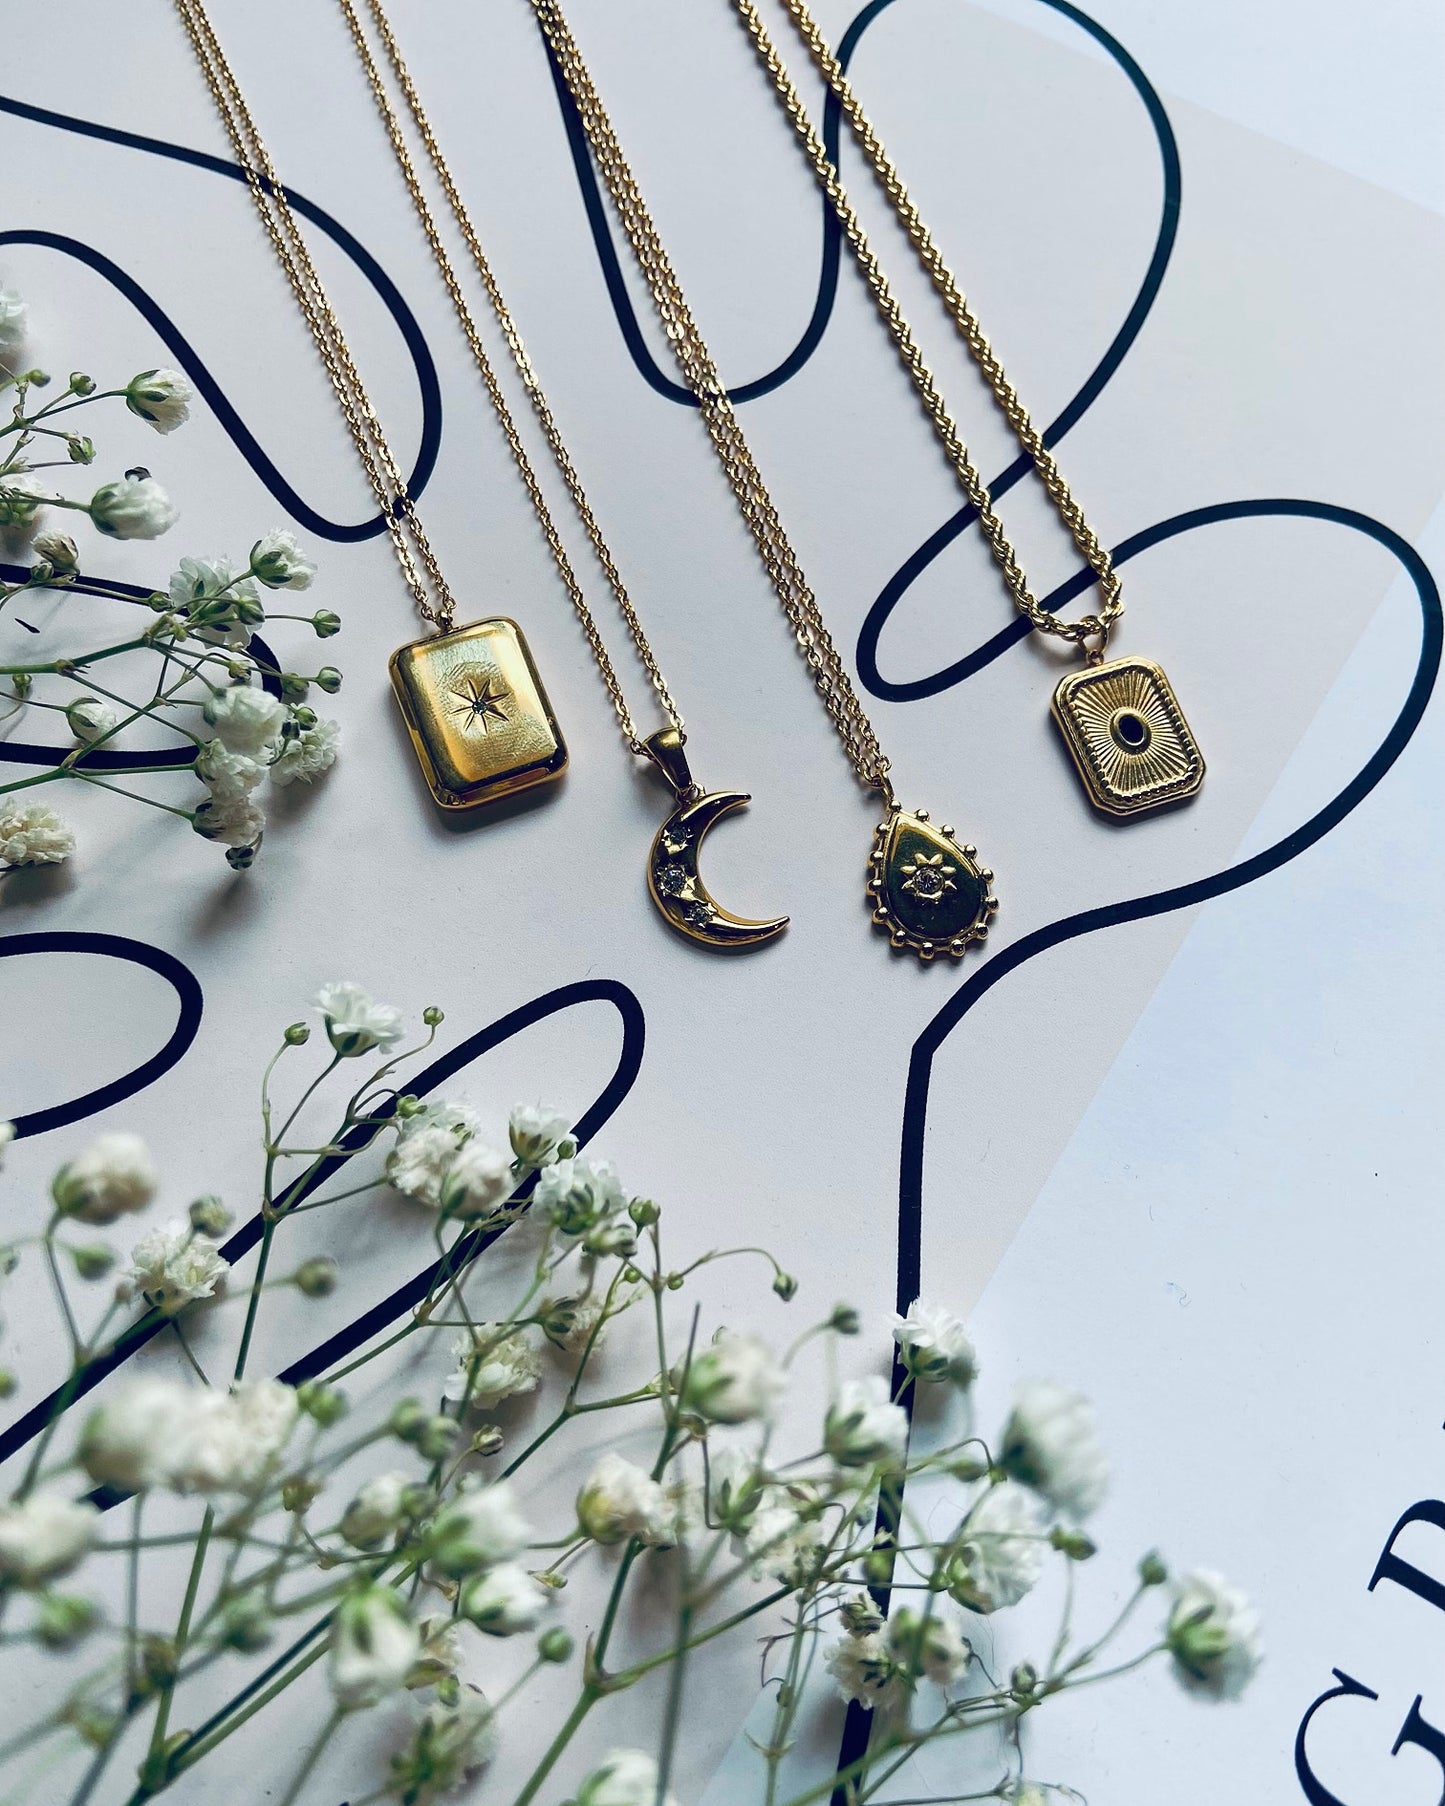 Gold Moon necklace